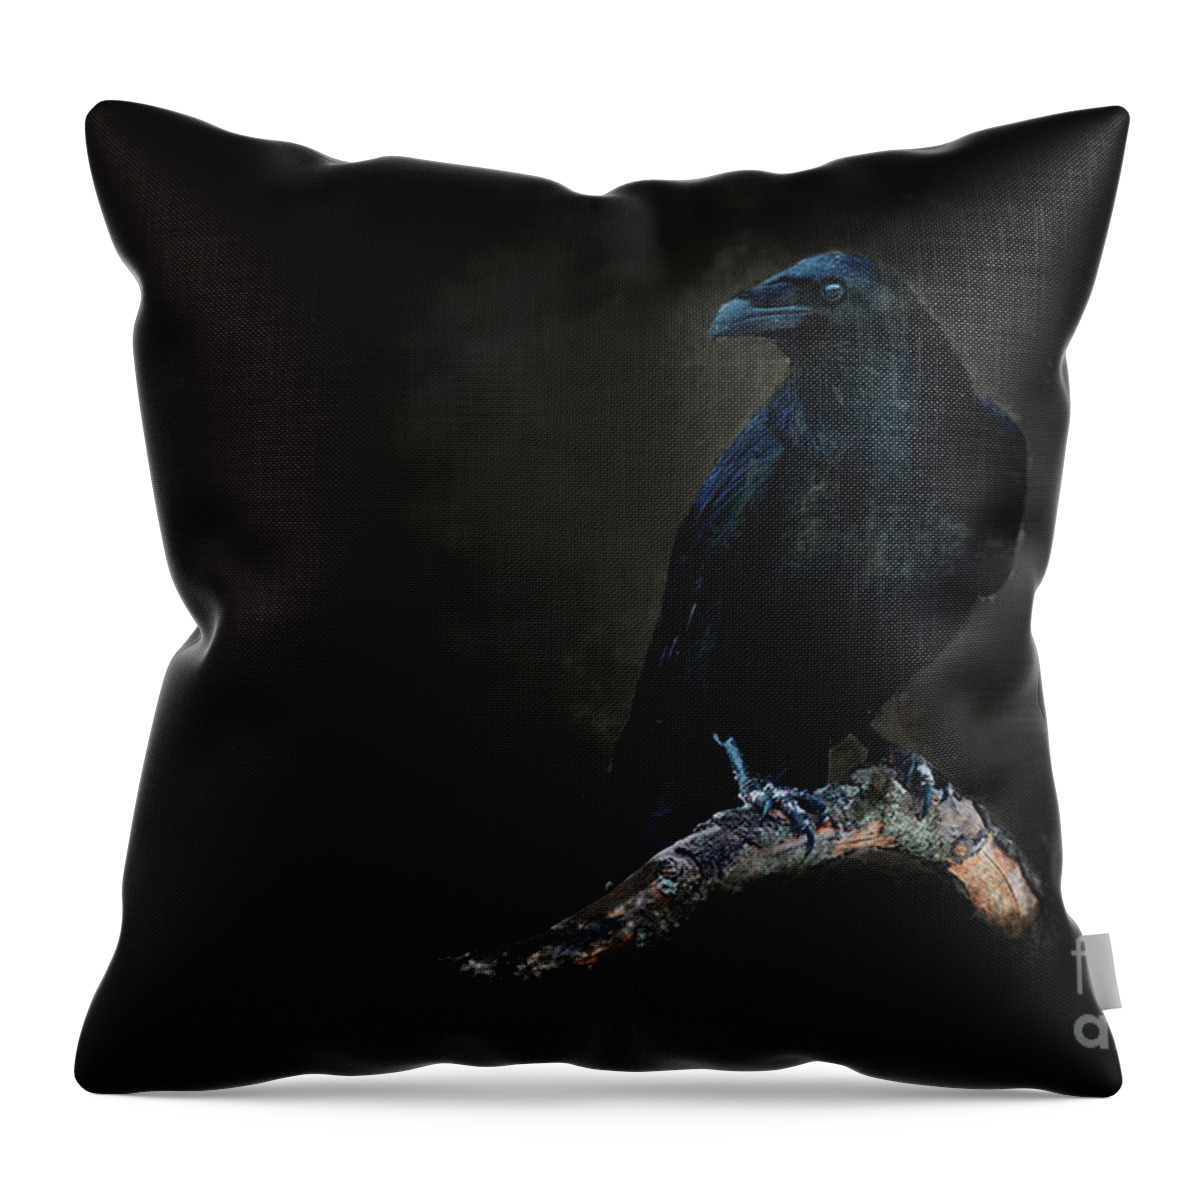 Crow Throw Pillow featuring the digital art Midnight Corvid by Jim Hatch